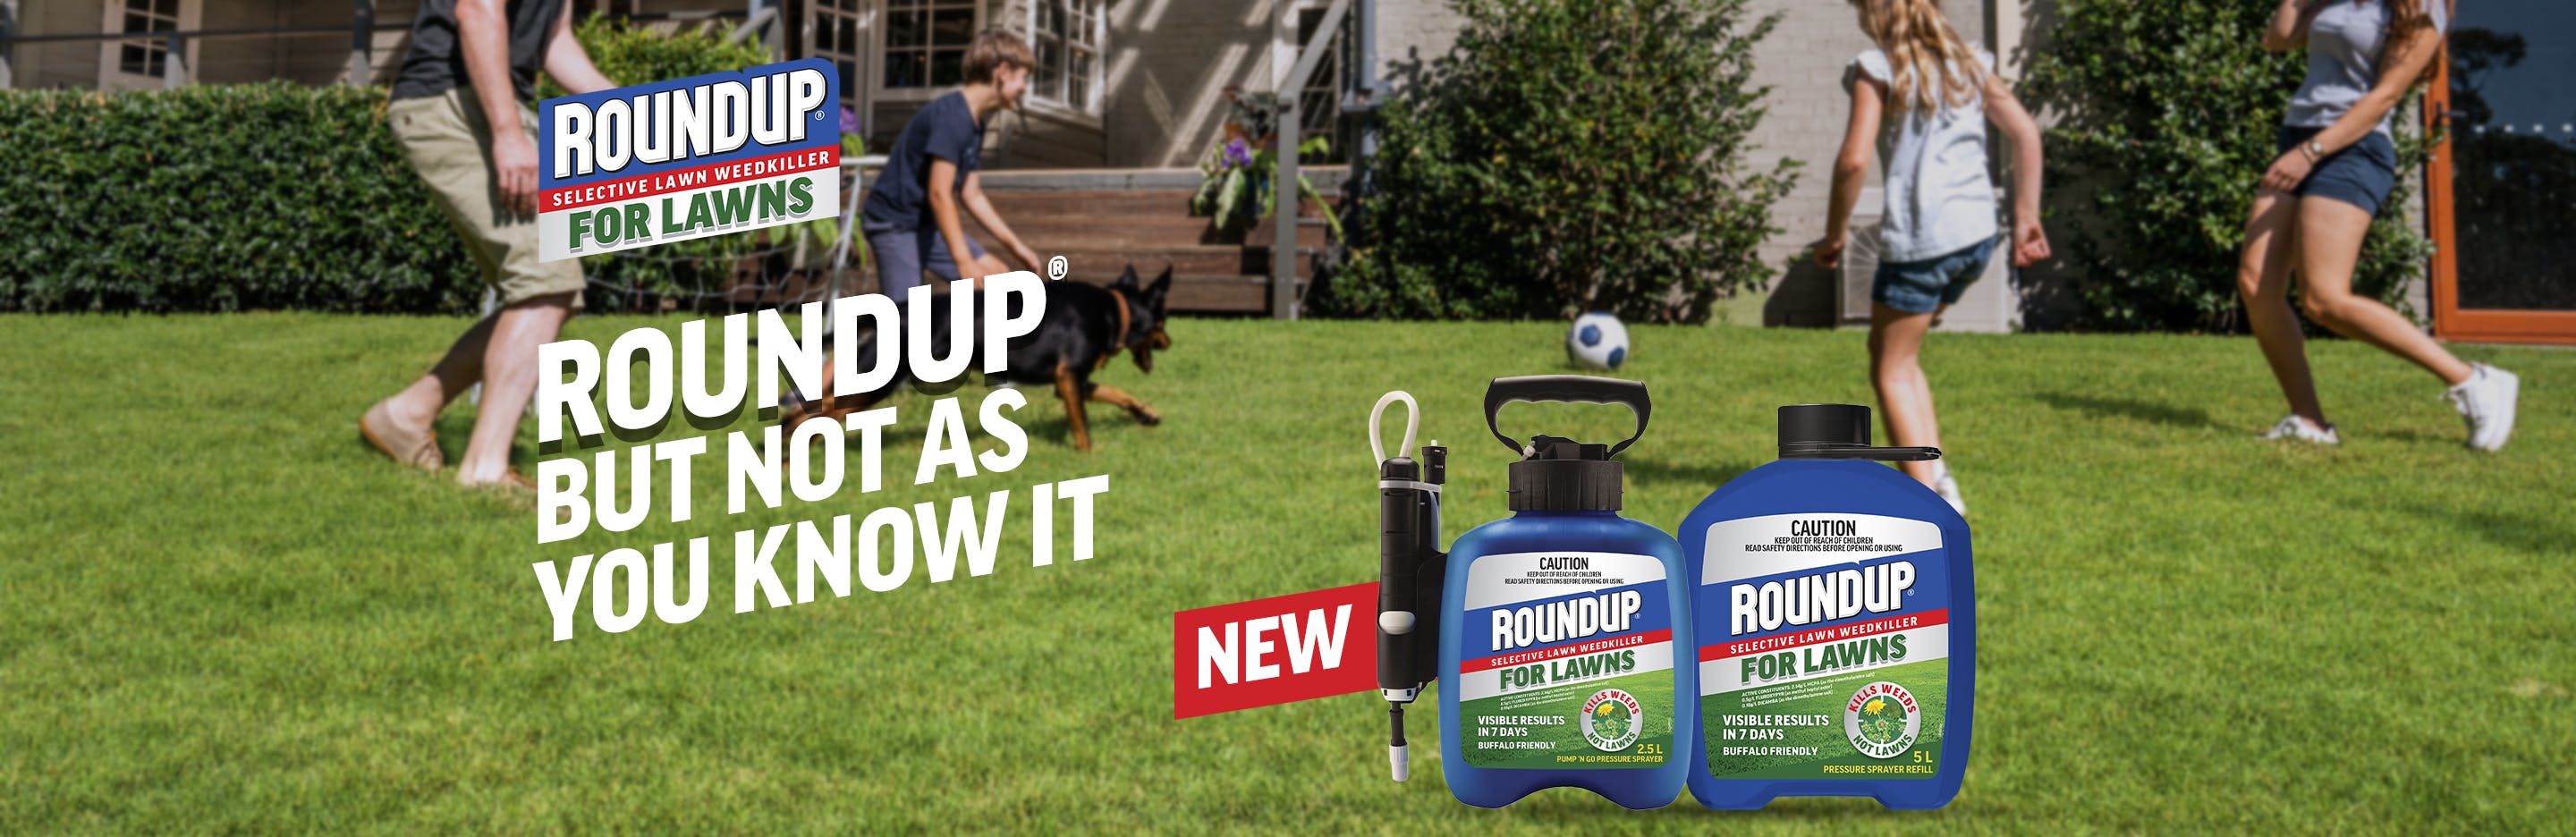 ROUNDUP® for Lawns but not as you know it